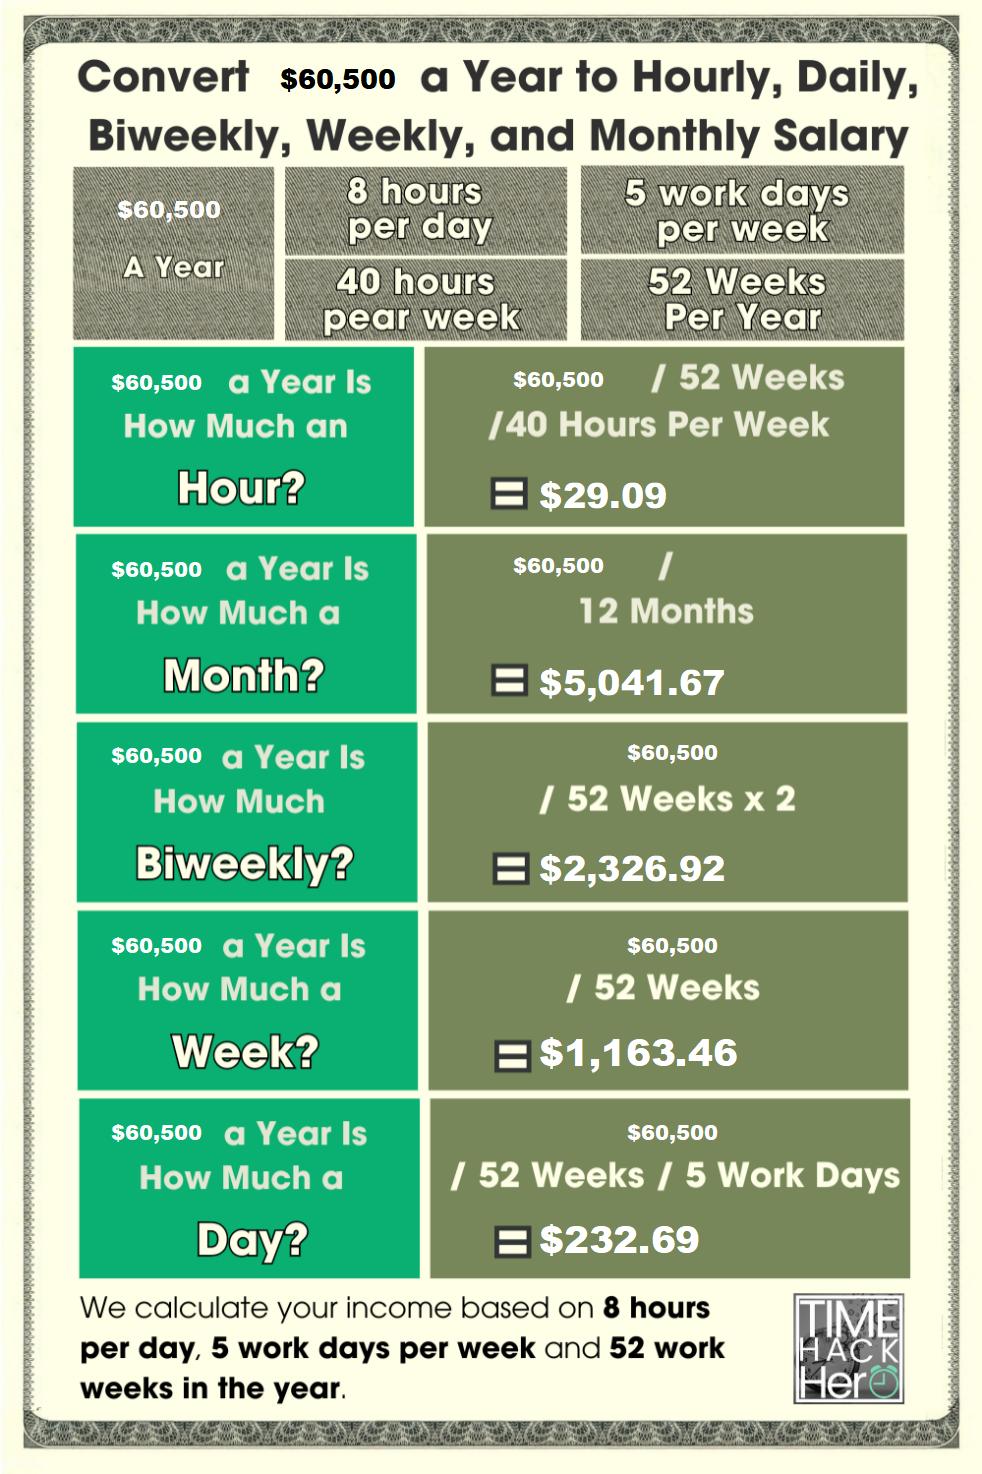 Convert $60500 a Year to Hourly, Daily, Biweekly, Weekly, and Monthly Salary